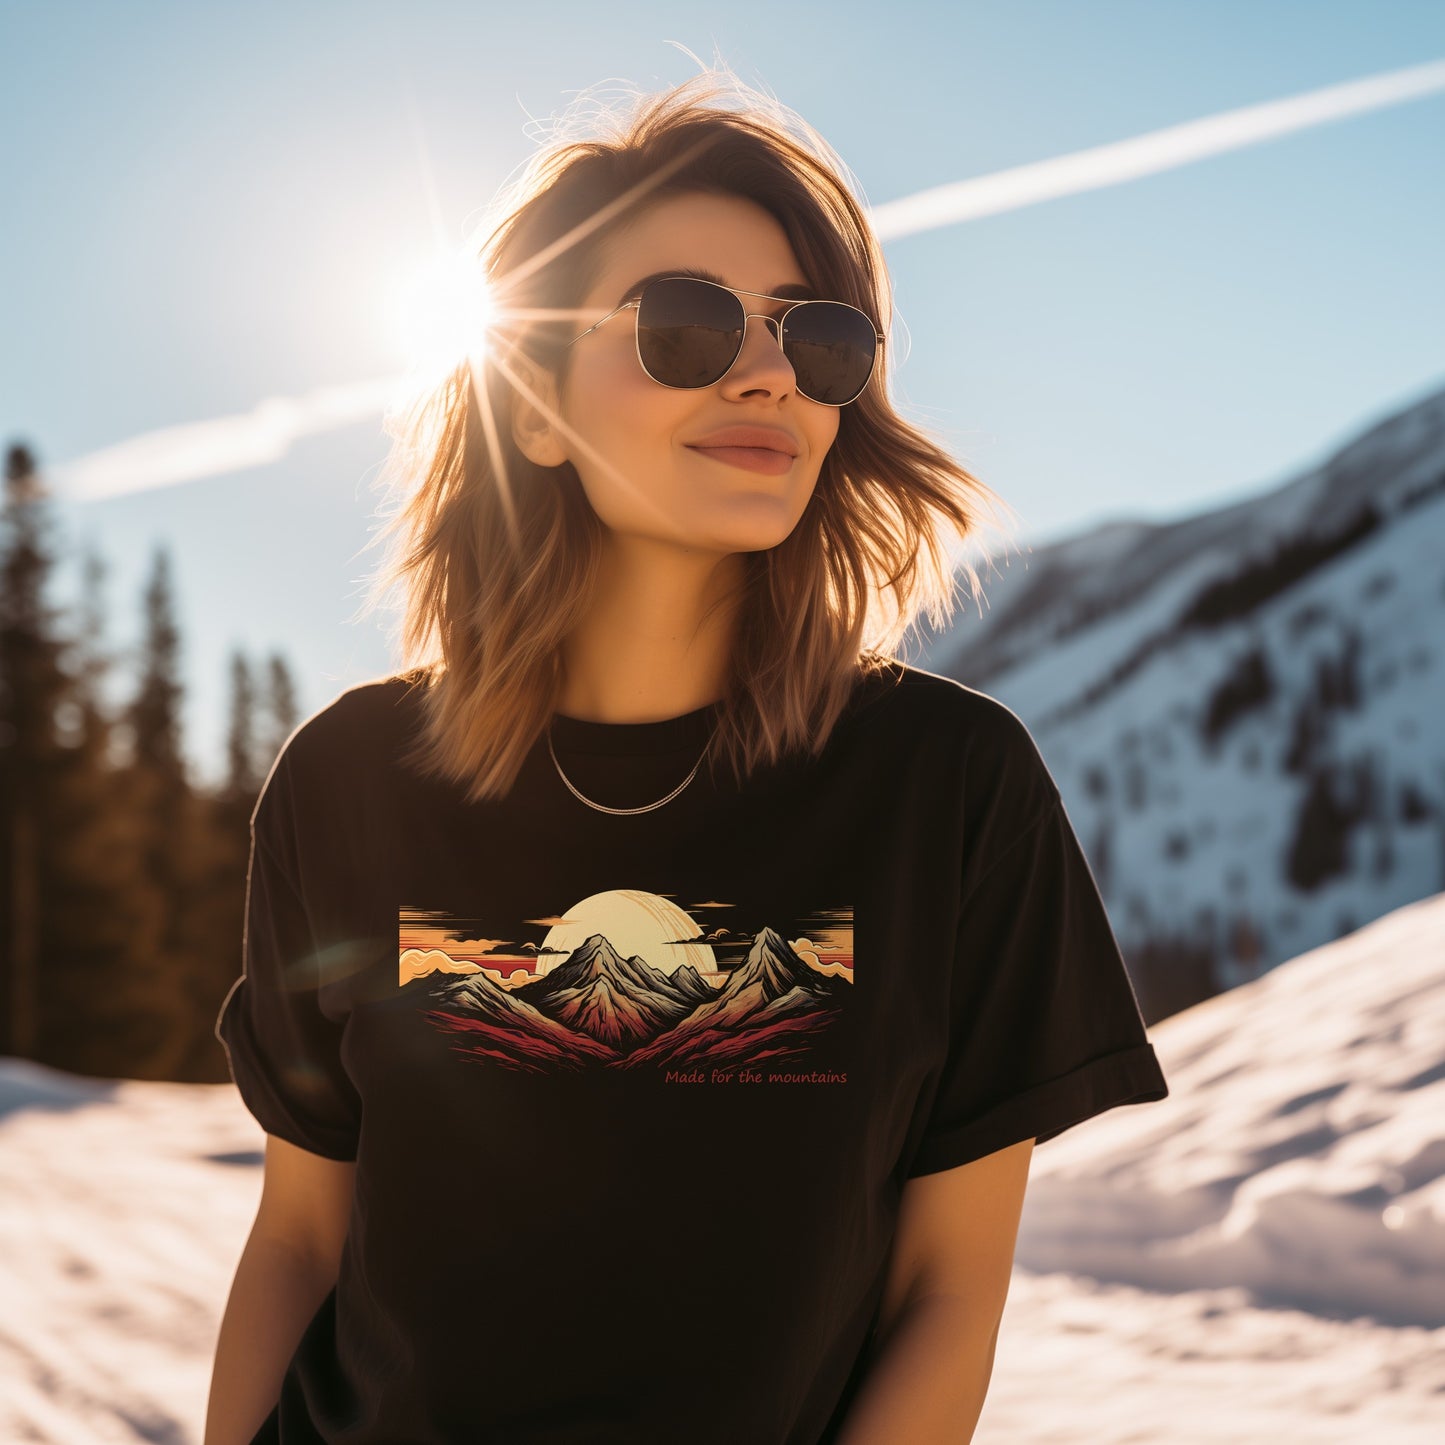 Unisex T-shirt: "Made for the mountains" 2